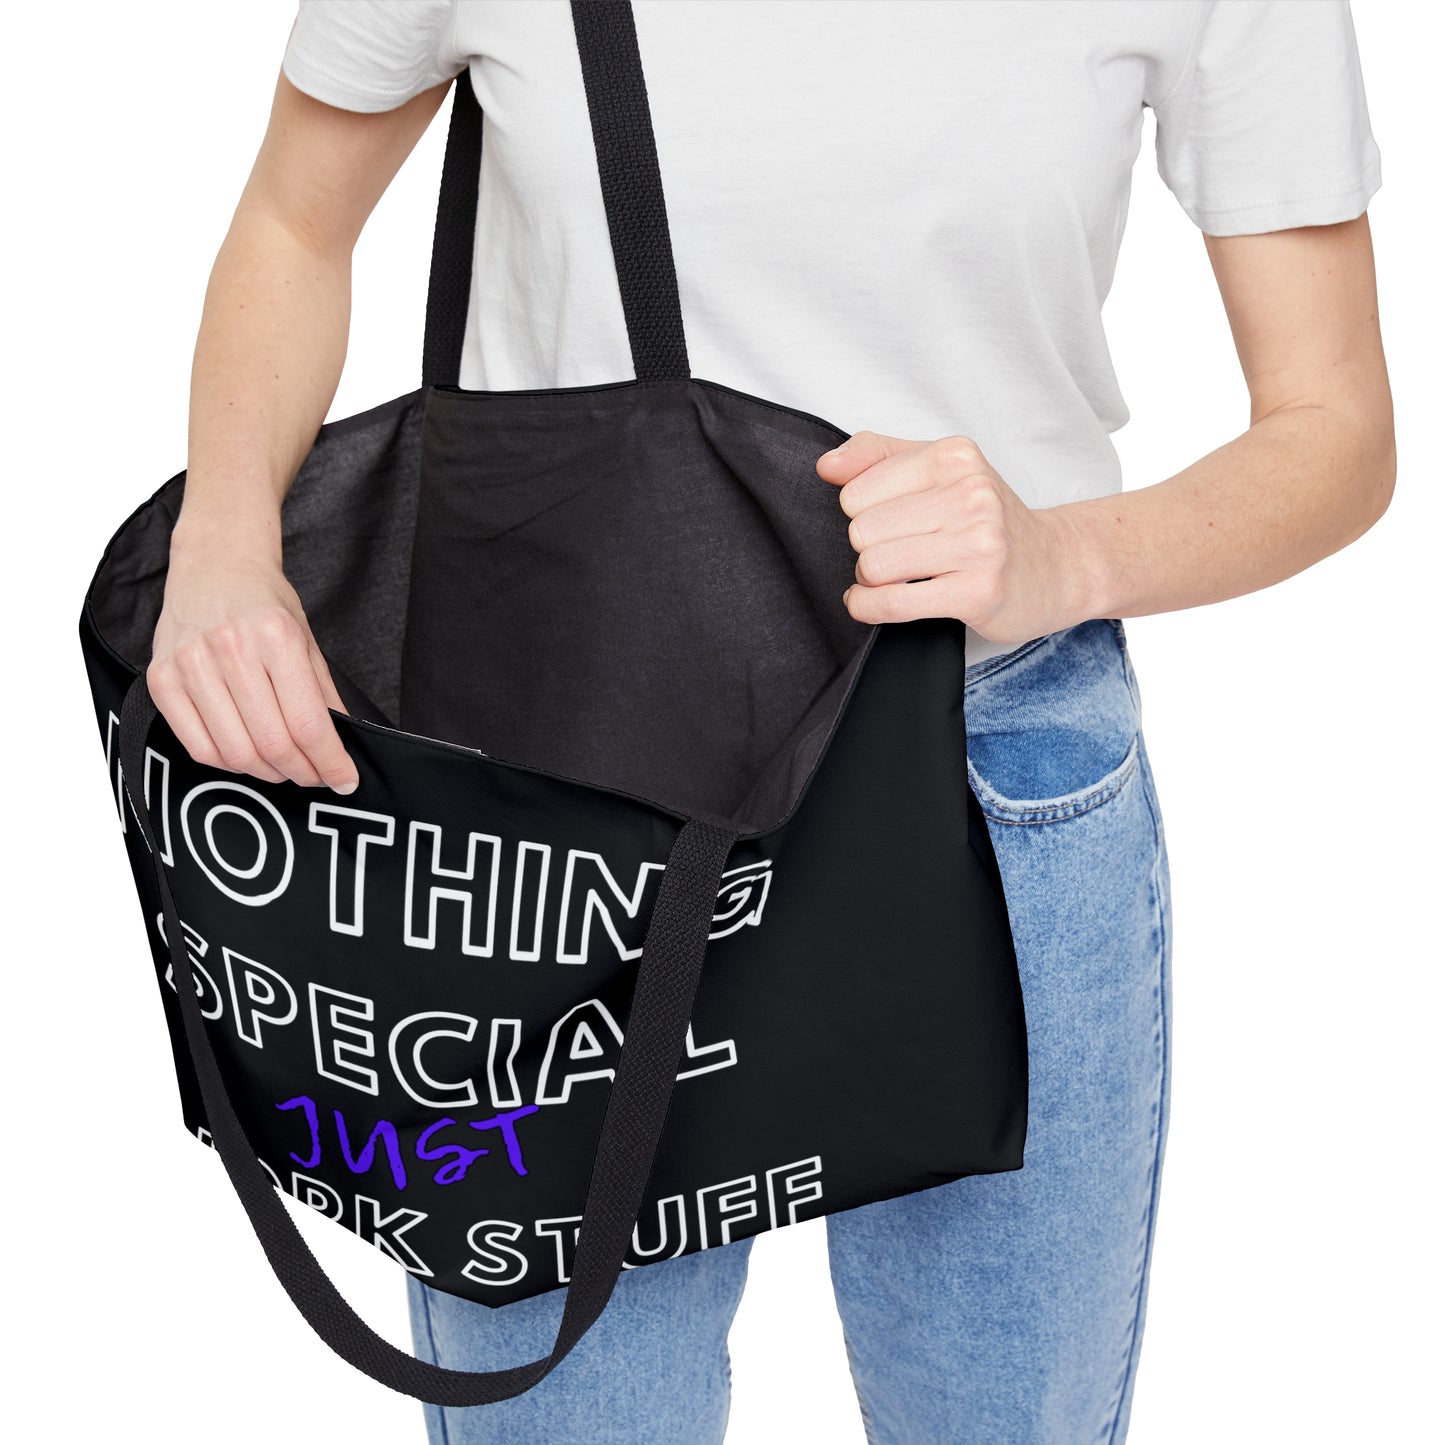 Nothing Special Just Work Bag - Tote Bag